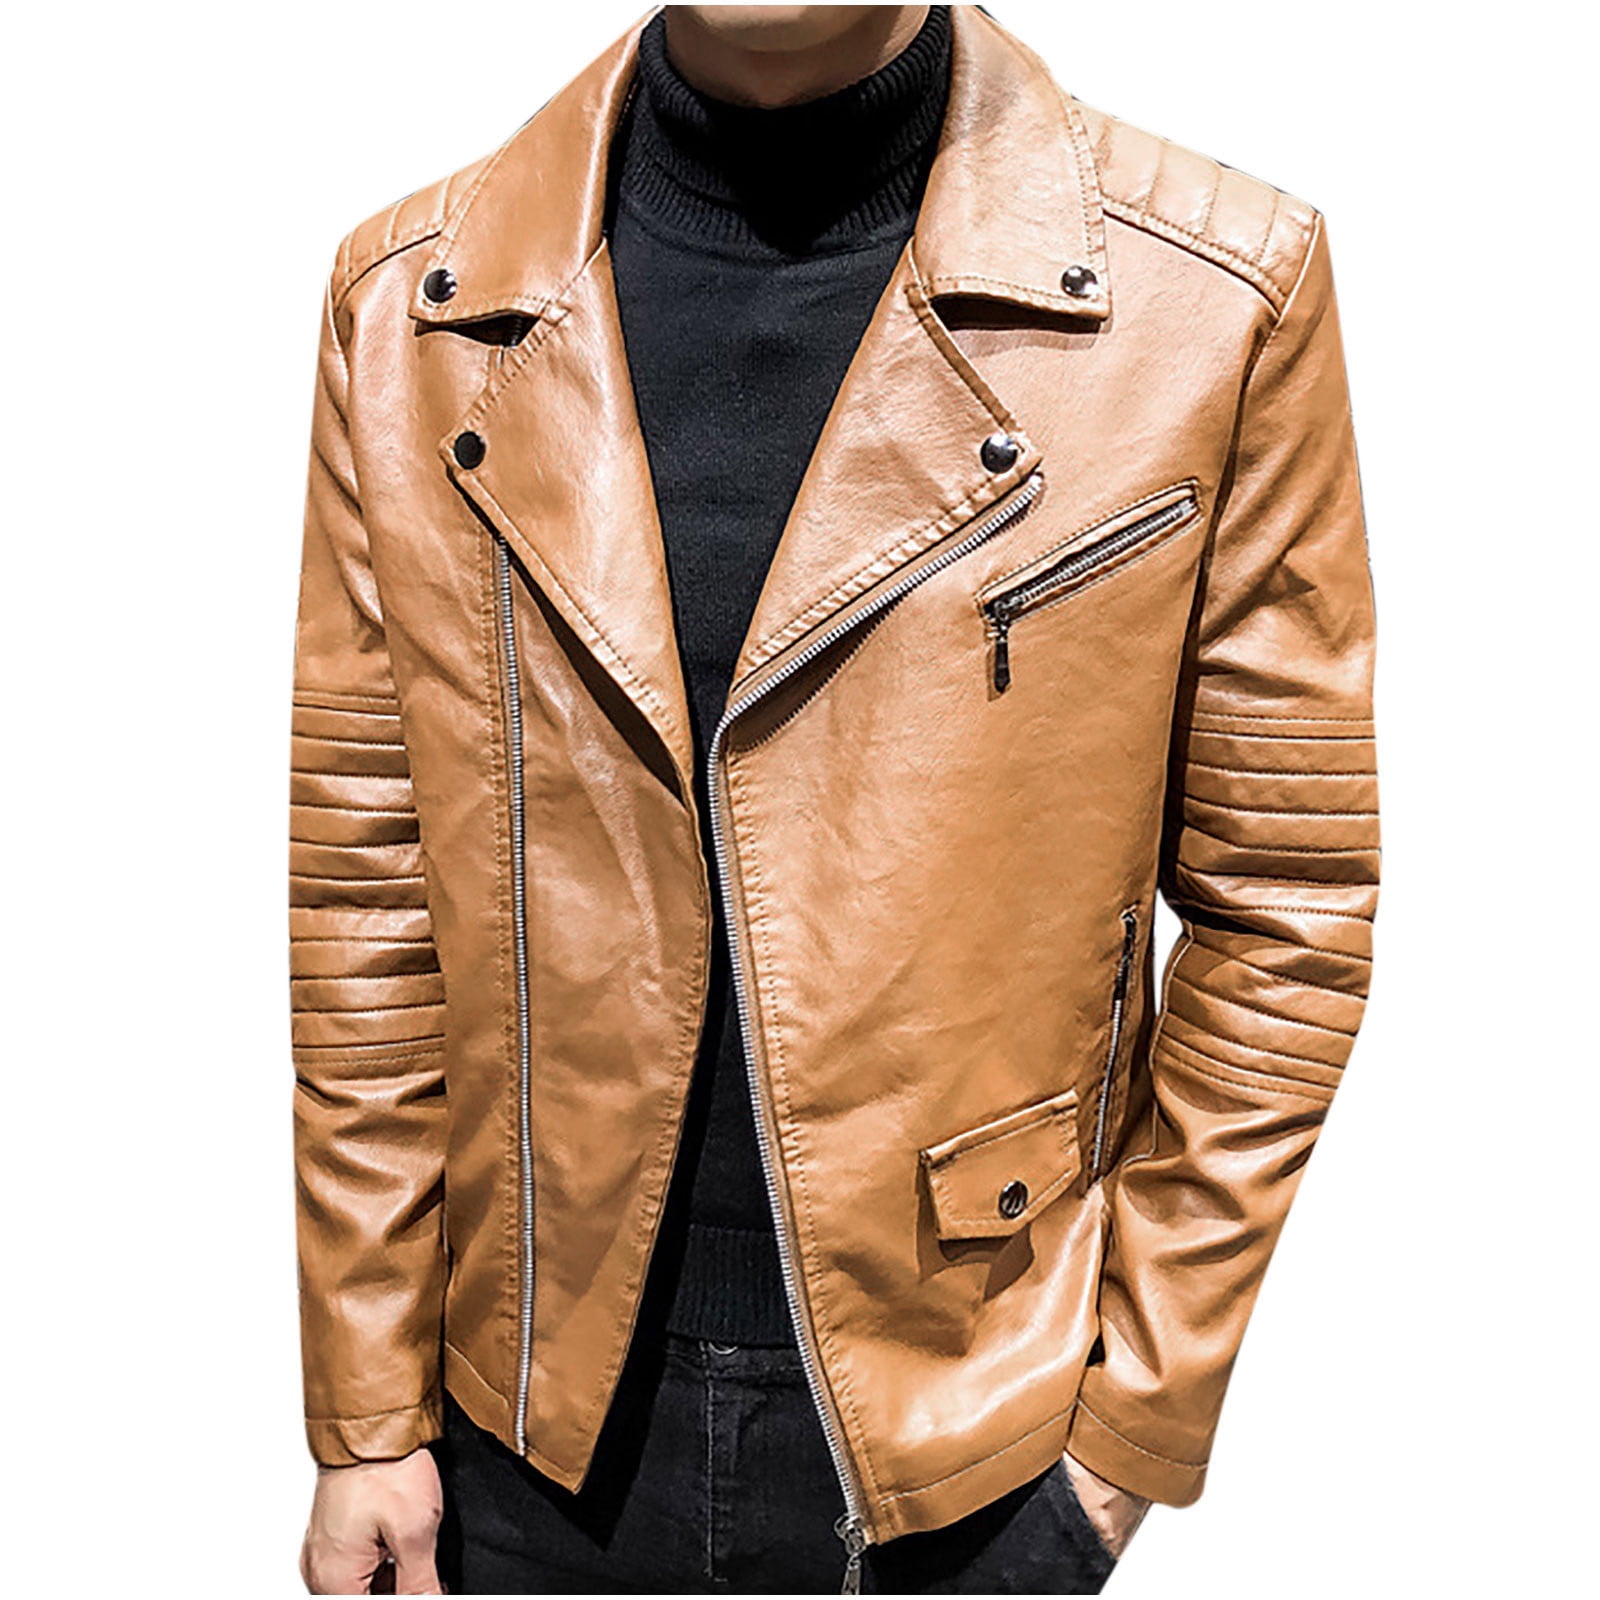 Clearance Clothes Under $5.00 ! BVnarty Jackets for Men Solid Color Lapel  Leather Motorcycle Jacket Warm Outwear Coat Fashion Casual Long Sleeve  Shacket Jacket Yellow XXL 